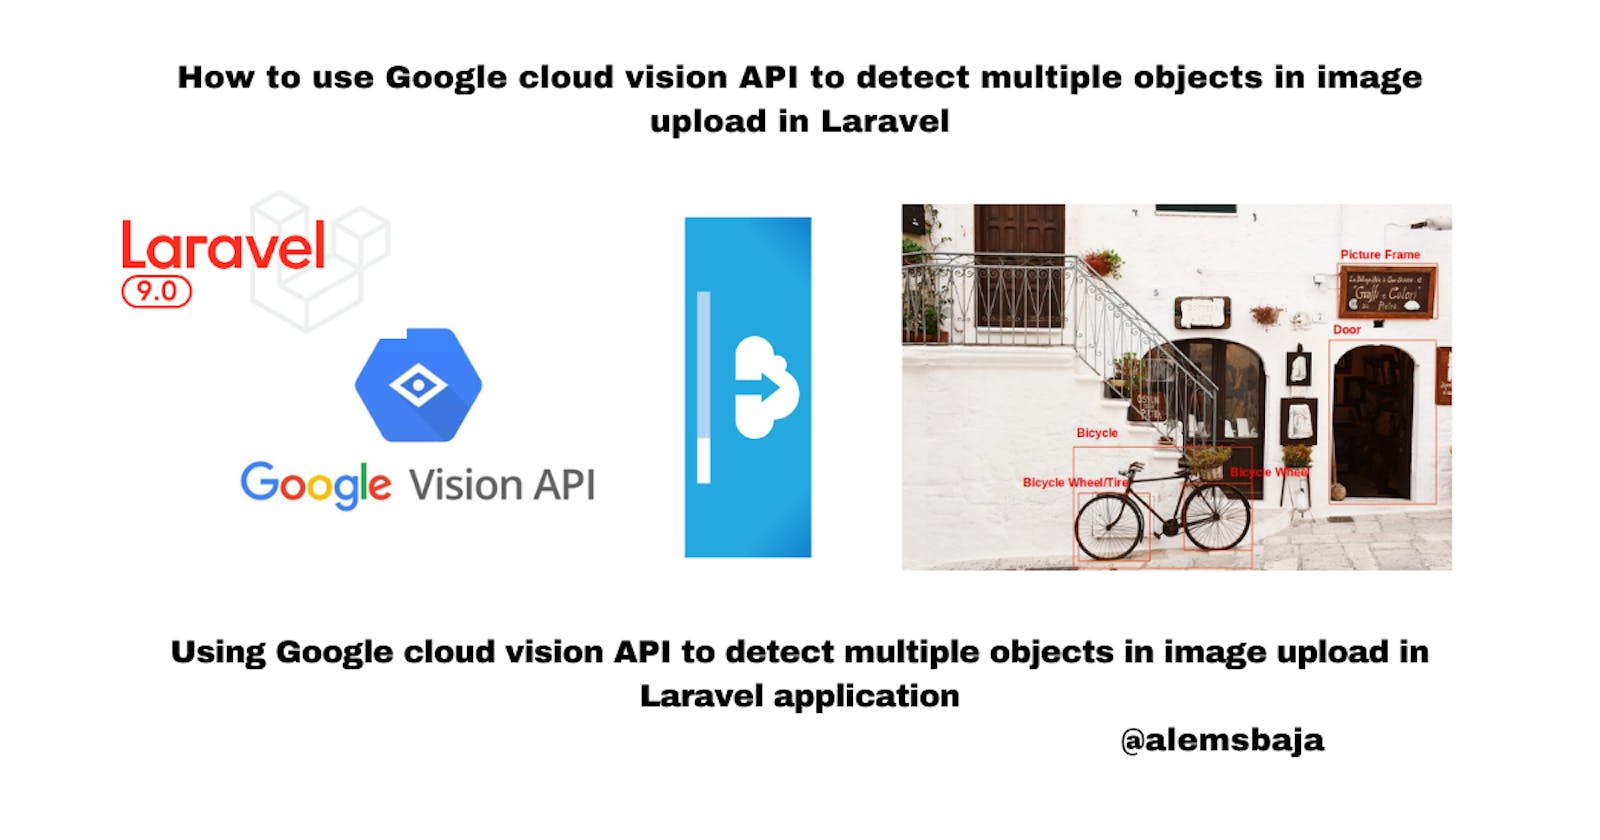 How to use Google cloud vision API to detect multiple objects in image upload in Laravel